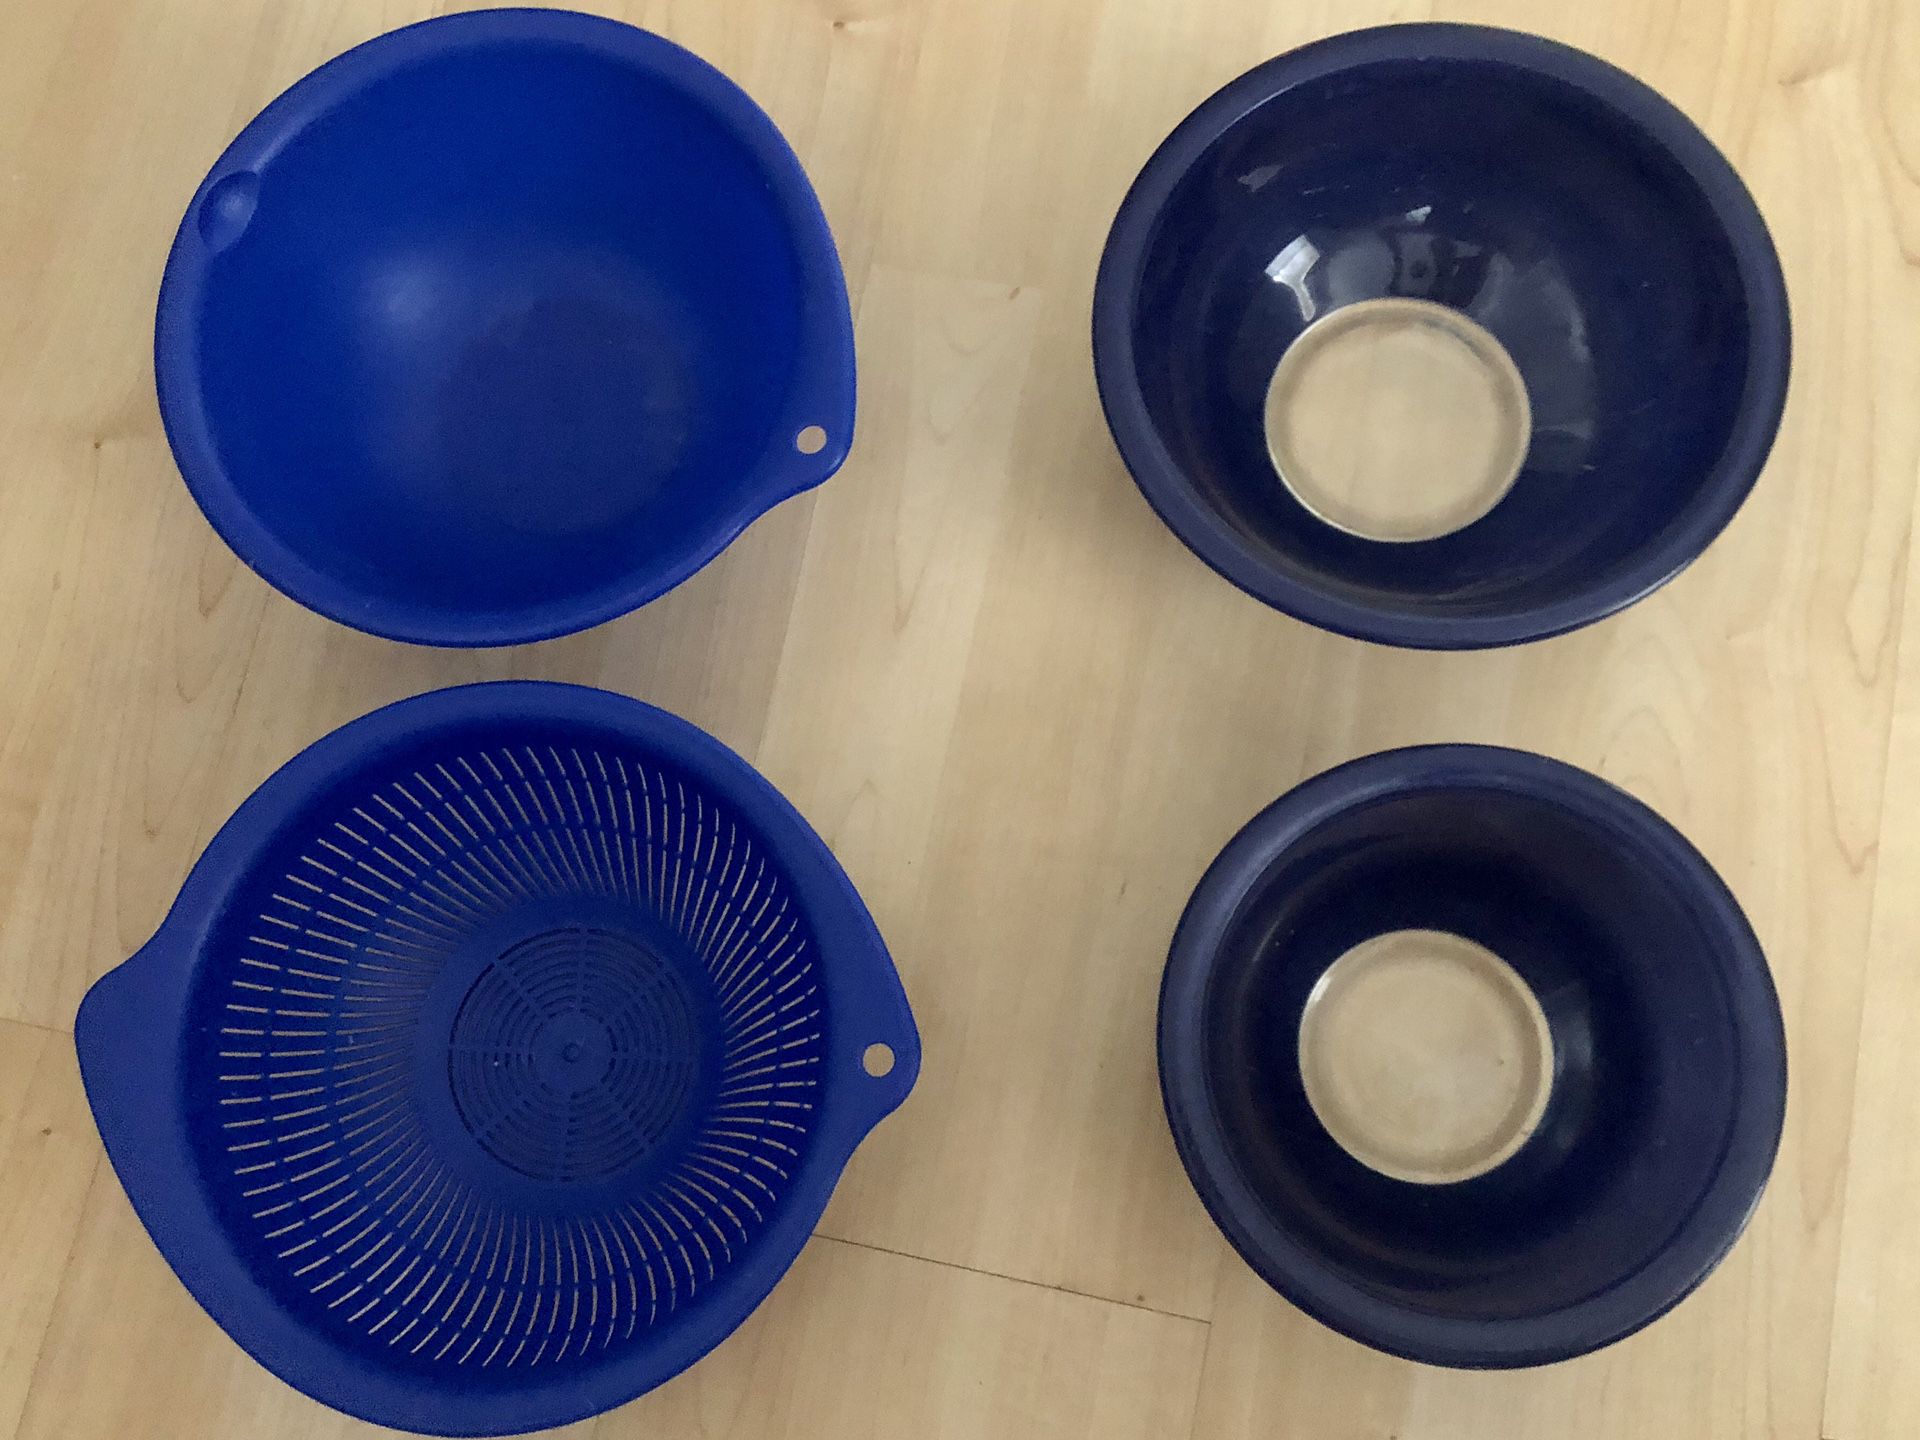 4pc Blue Kitchen Set- Pyrex mixing bowls and plastic strainer bowl